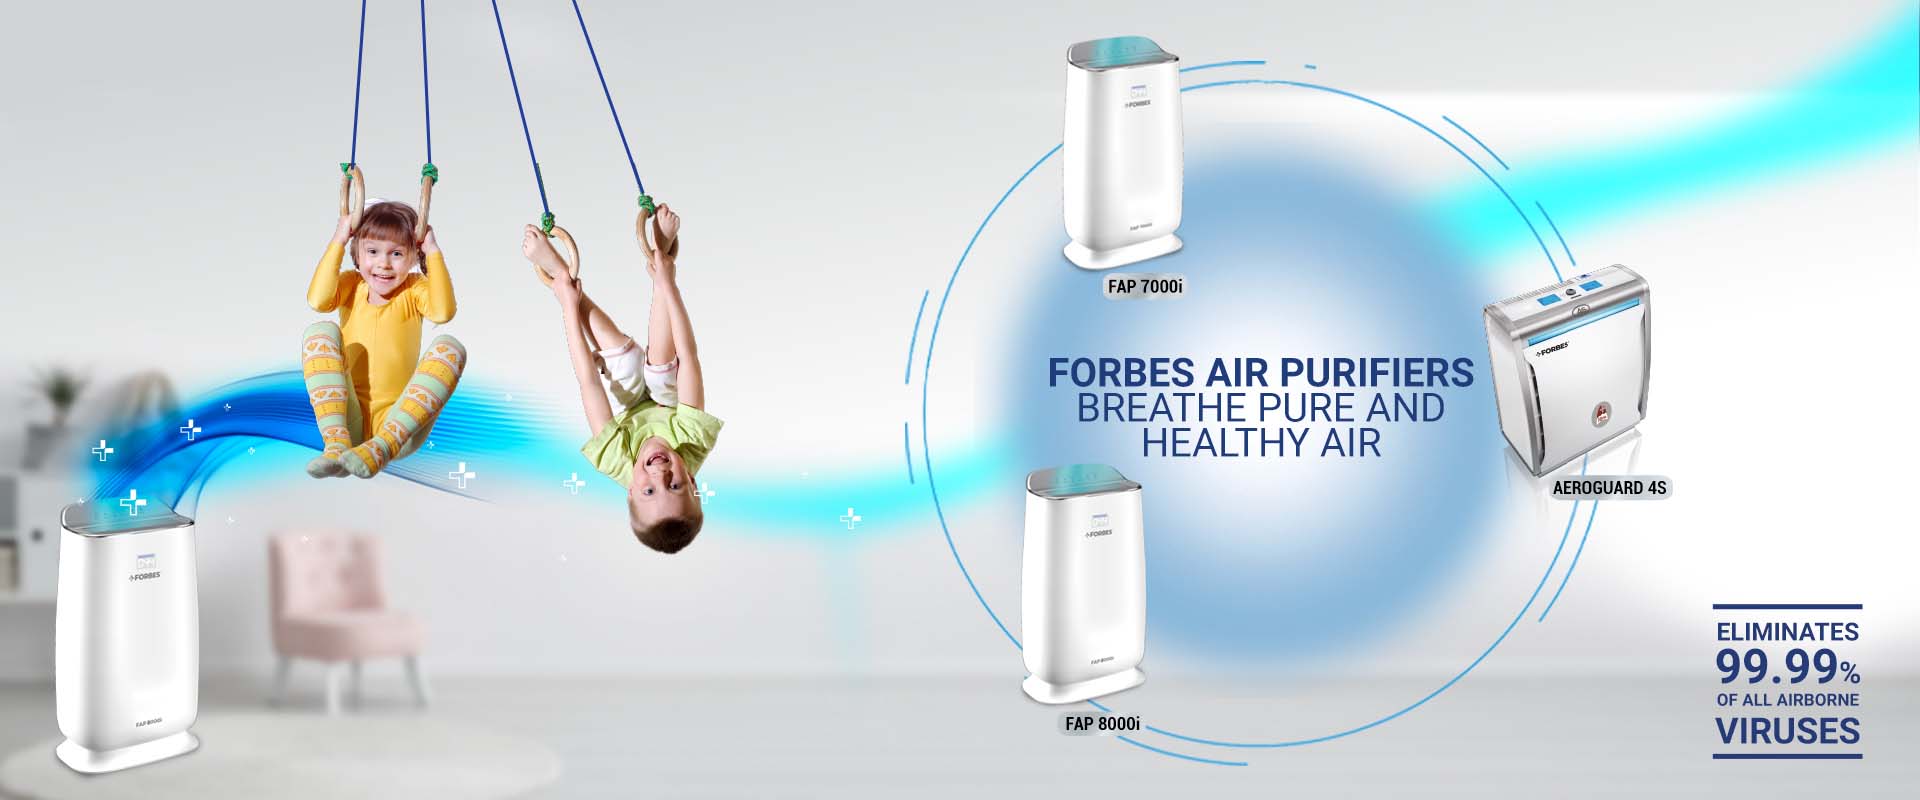 FORBES AIR PURIFIERS BREATHE PURE AND HEALTHY AIR